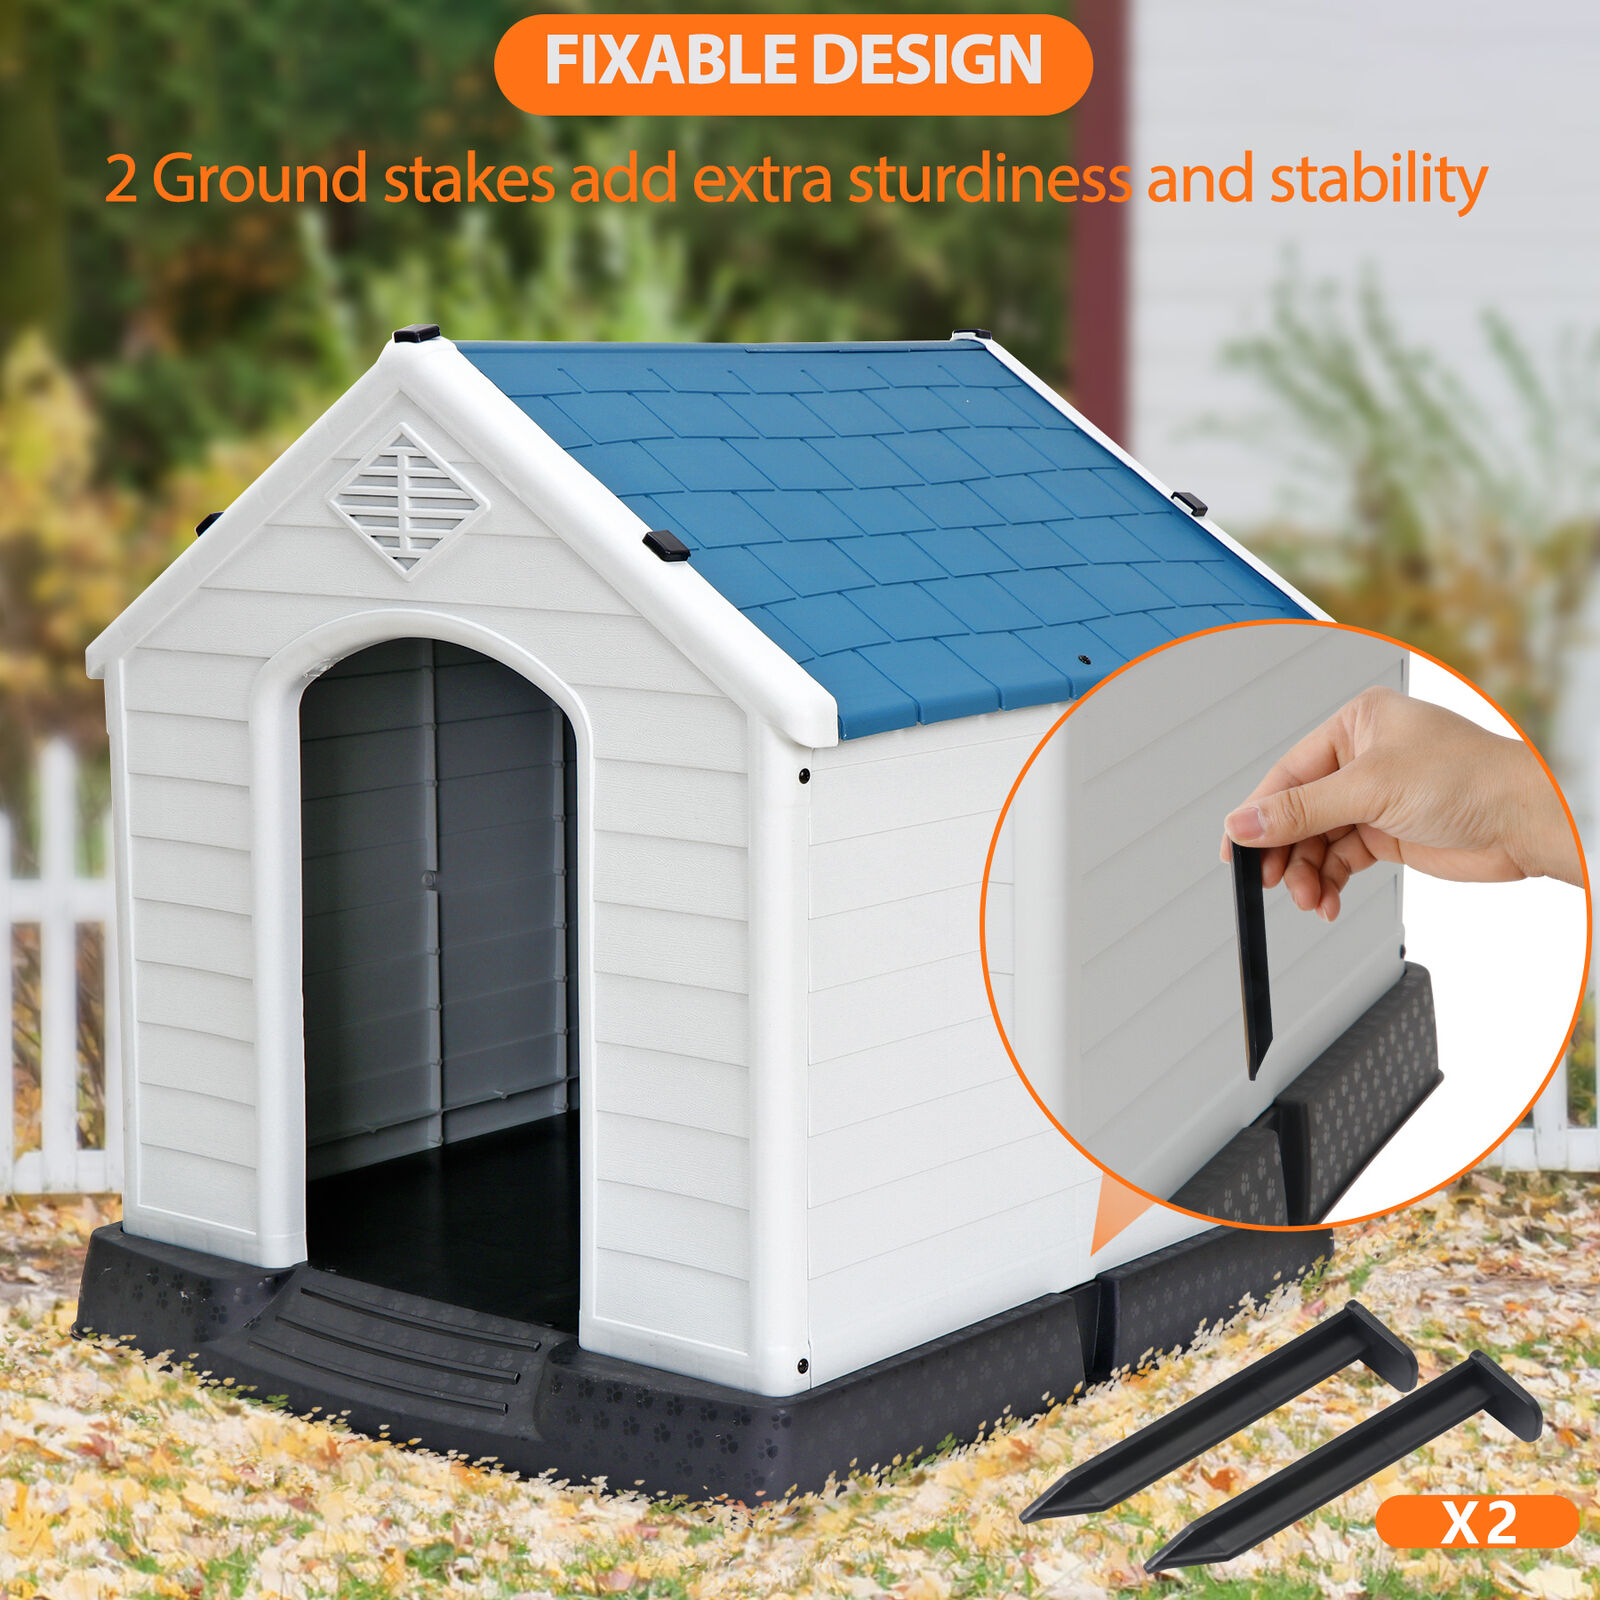 thinkstar 32" H Indoor Outdoor Dog Pet House With Elevated Floor And Air Vents, Blue White